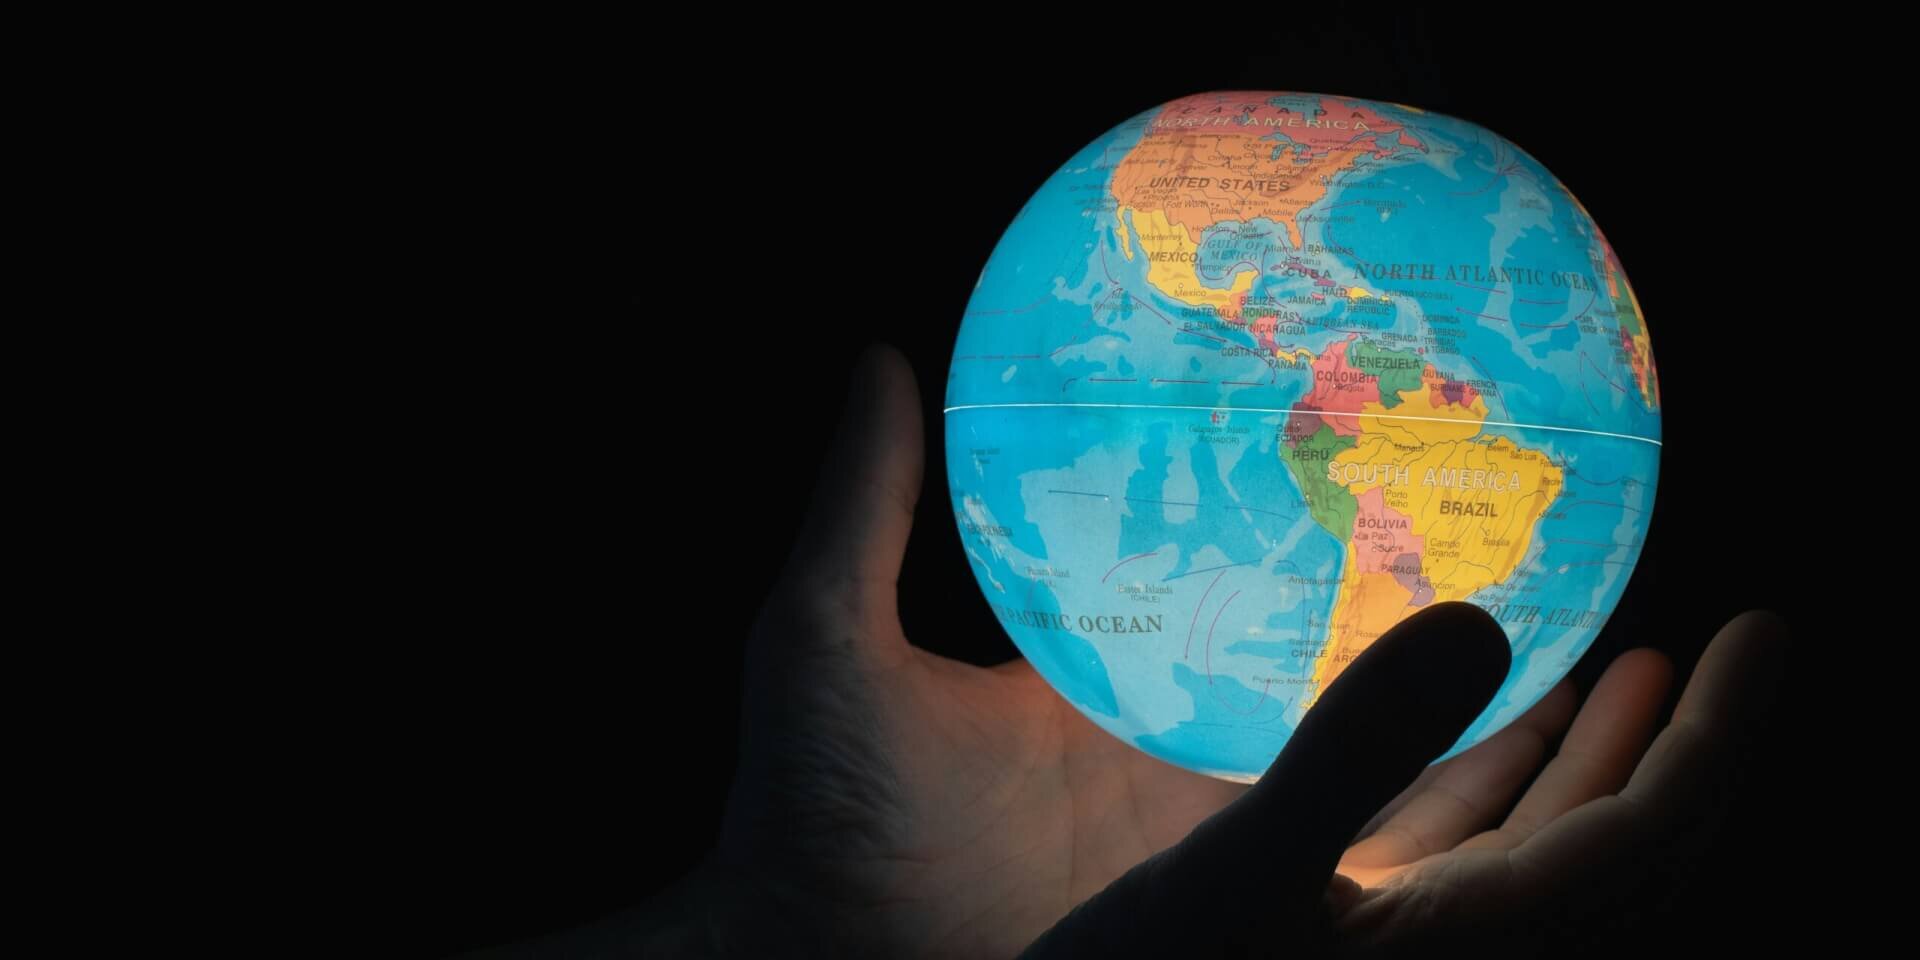 A glowing globe in the hands of a human with dark background